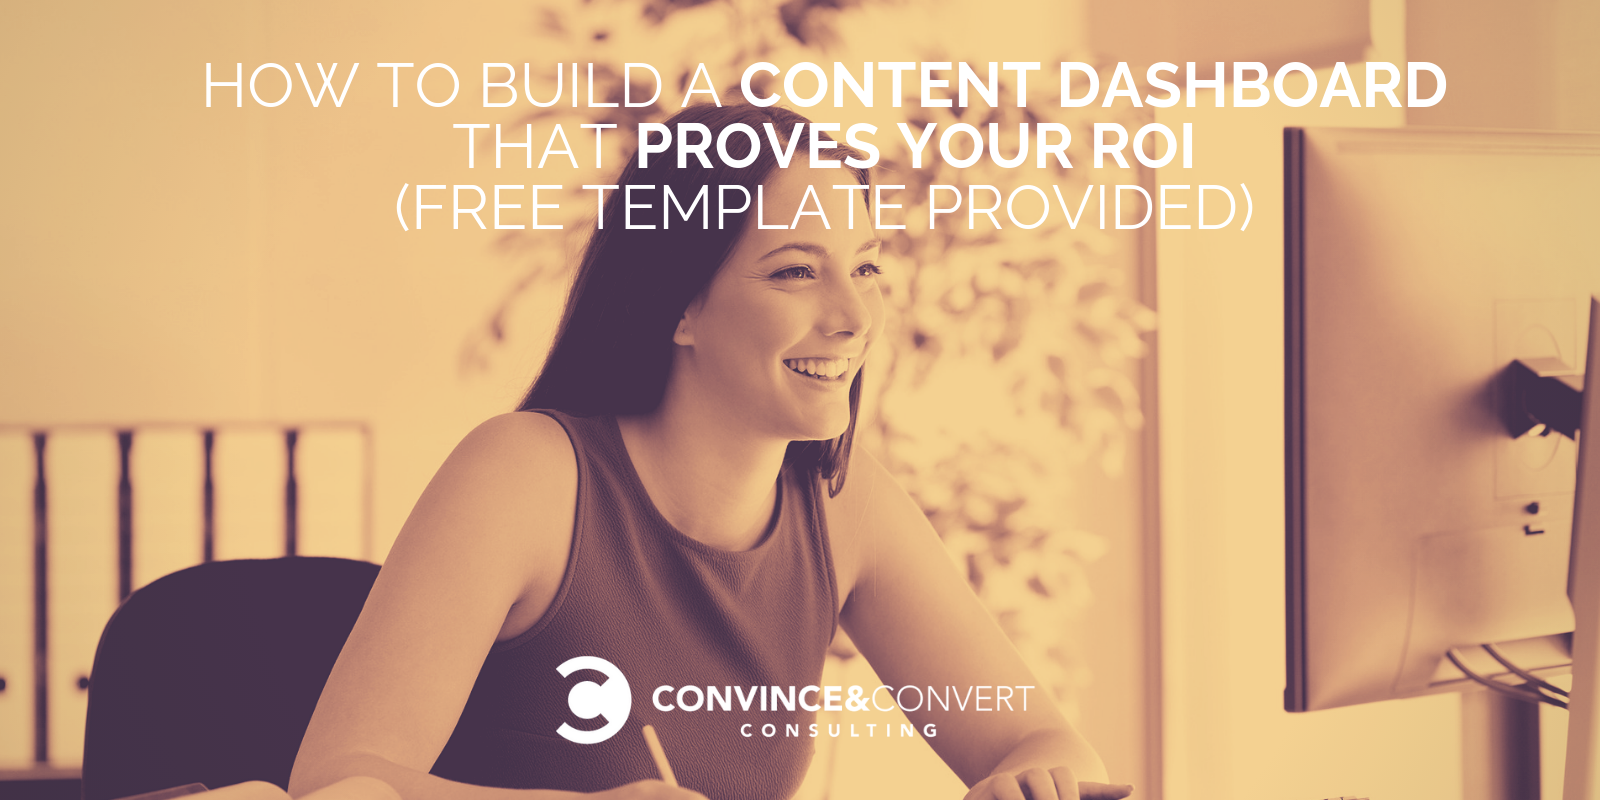 How to Build a Content Dashboard that Proves Your ROI (Free Template Provided)